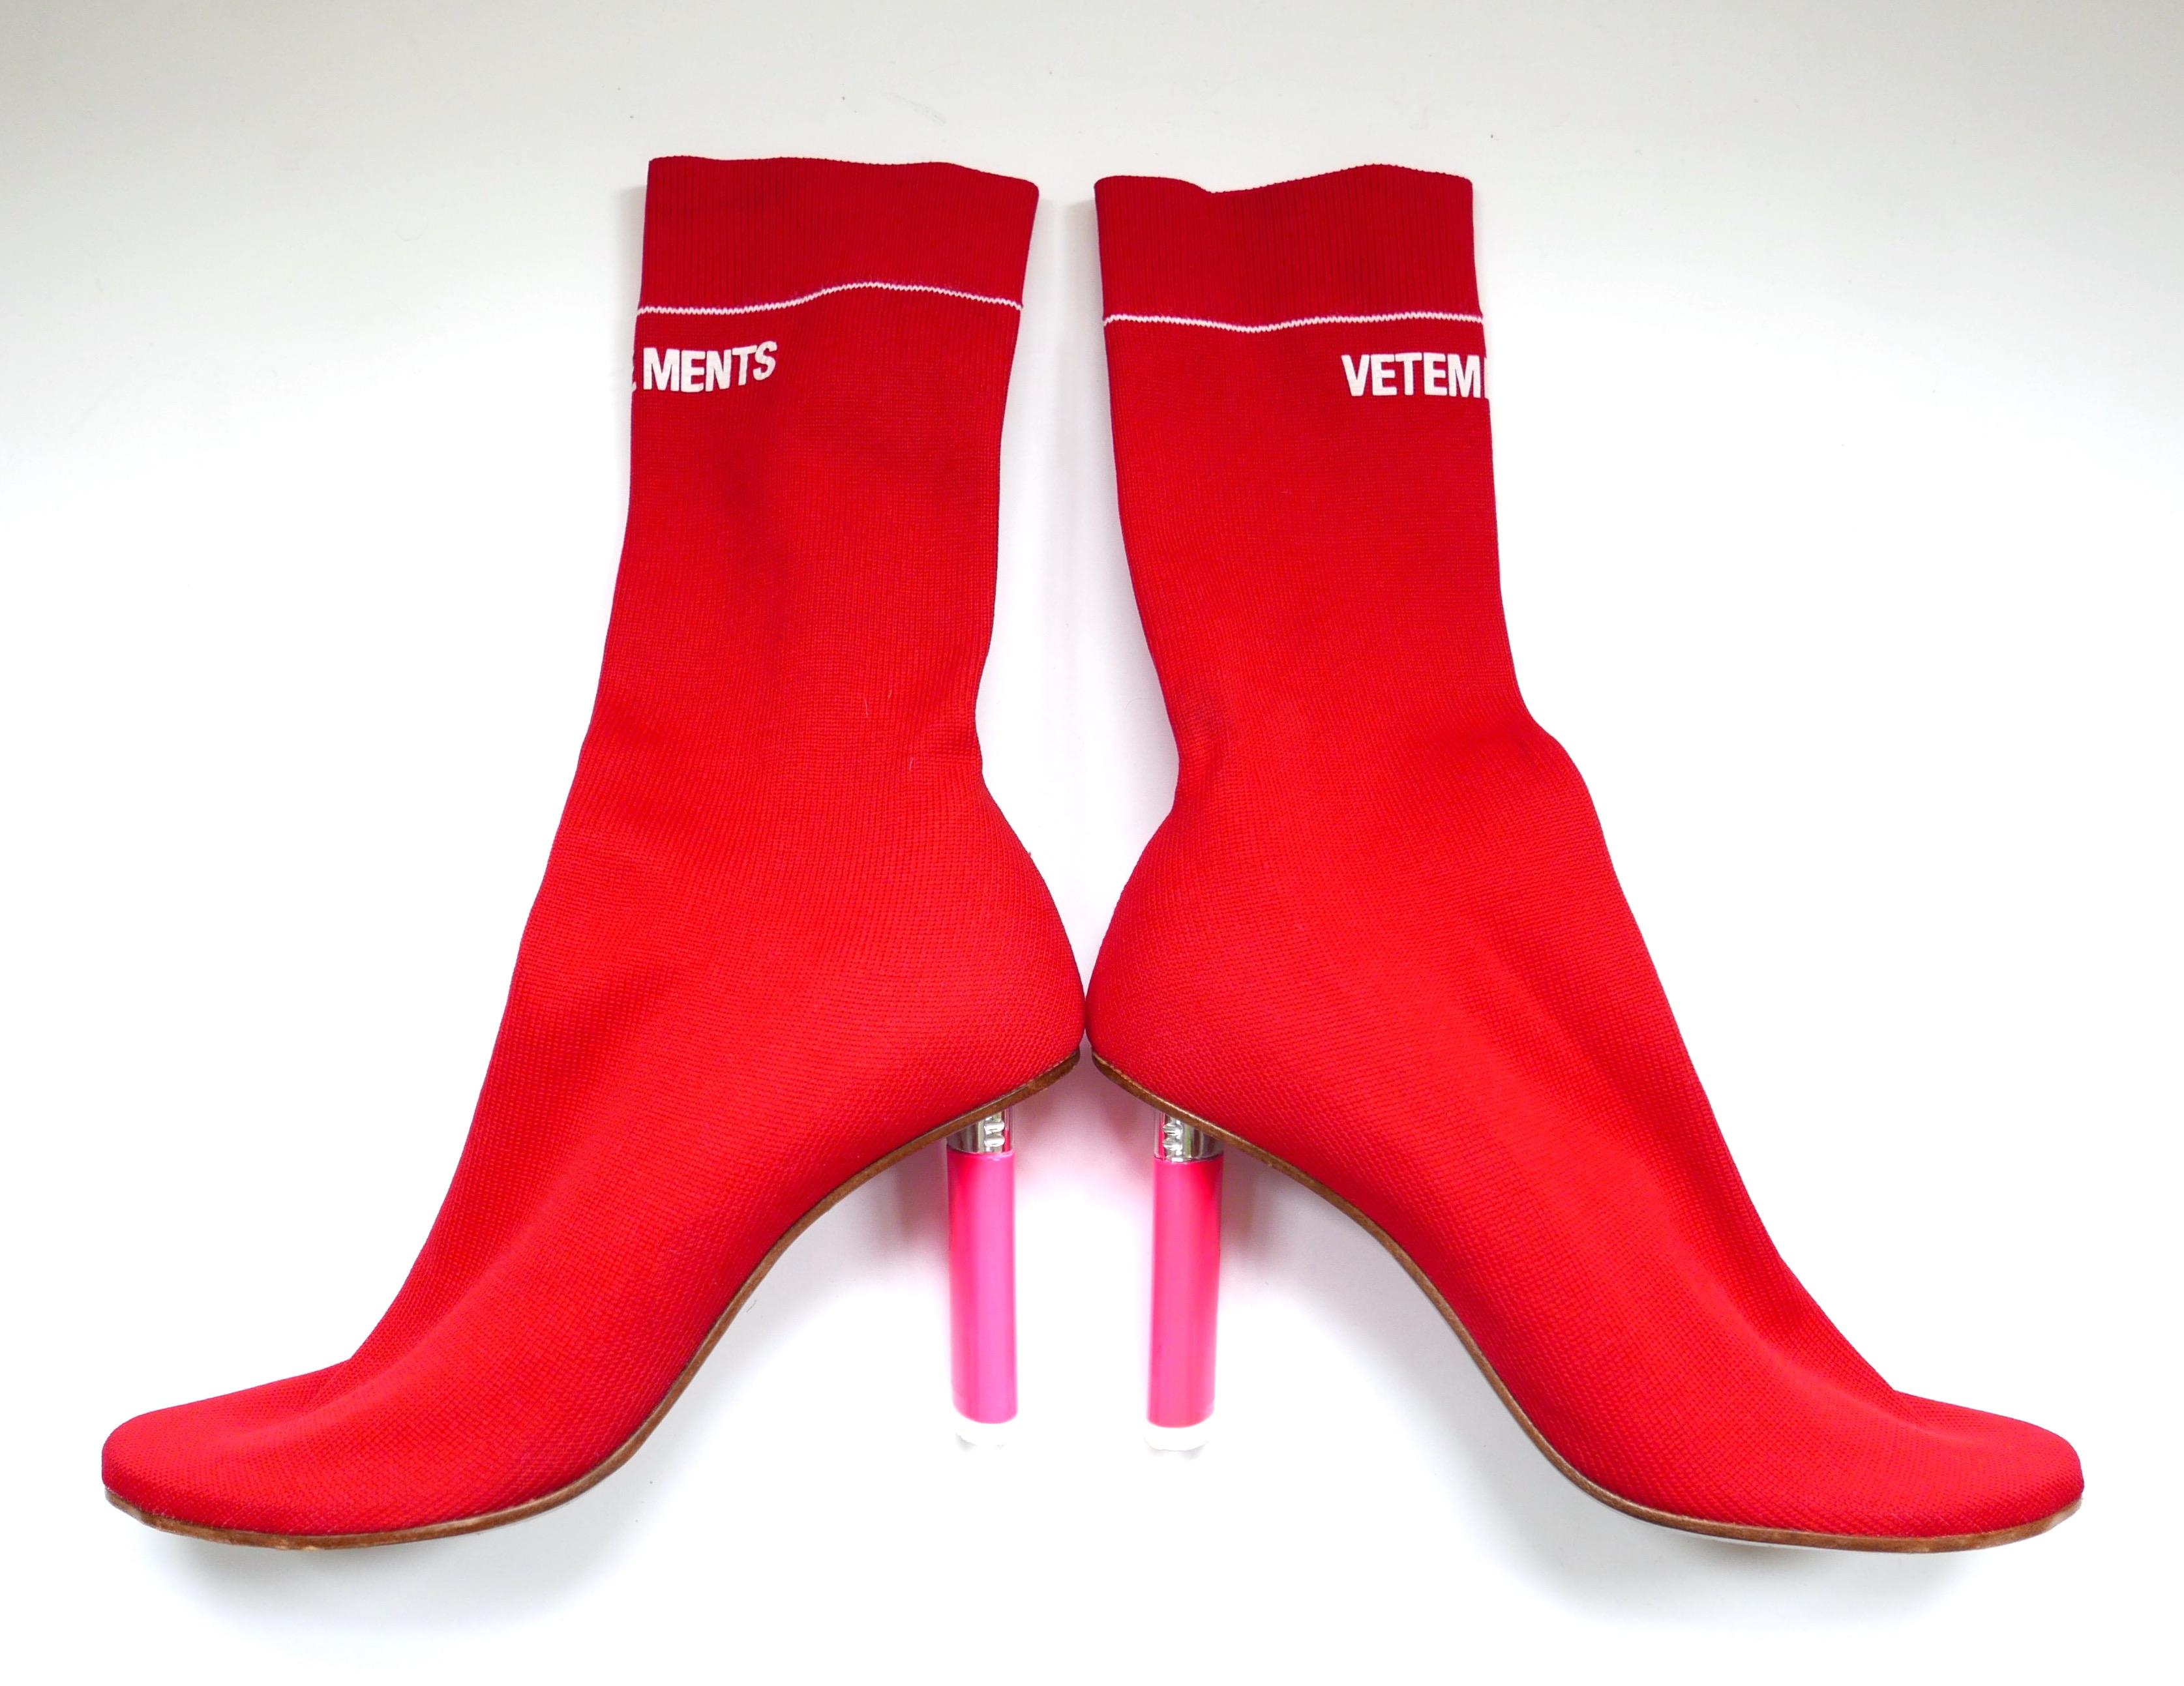 Iconic Vetements lighter heel sock boots in bright red and white ribbed knit with pink plastic disposable lighter shaped heels and logo tops. Worn once - have a few super light surface marks. Size 36. Measure approx 9.75” heel to toe and heels 3”
